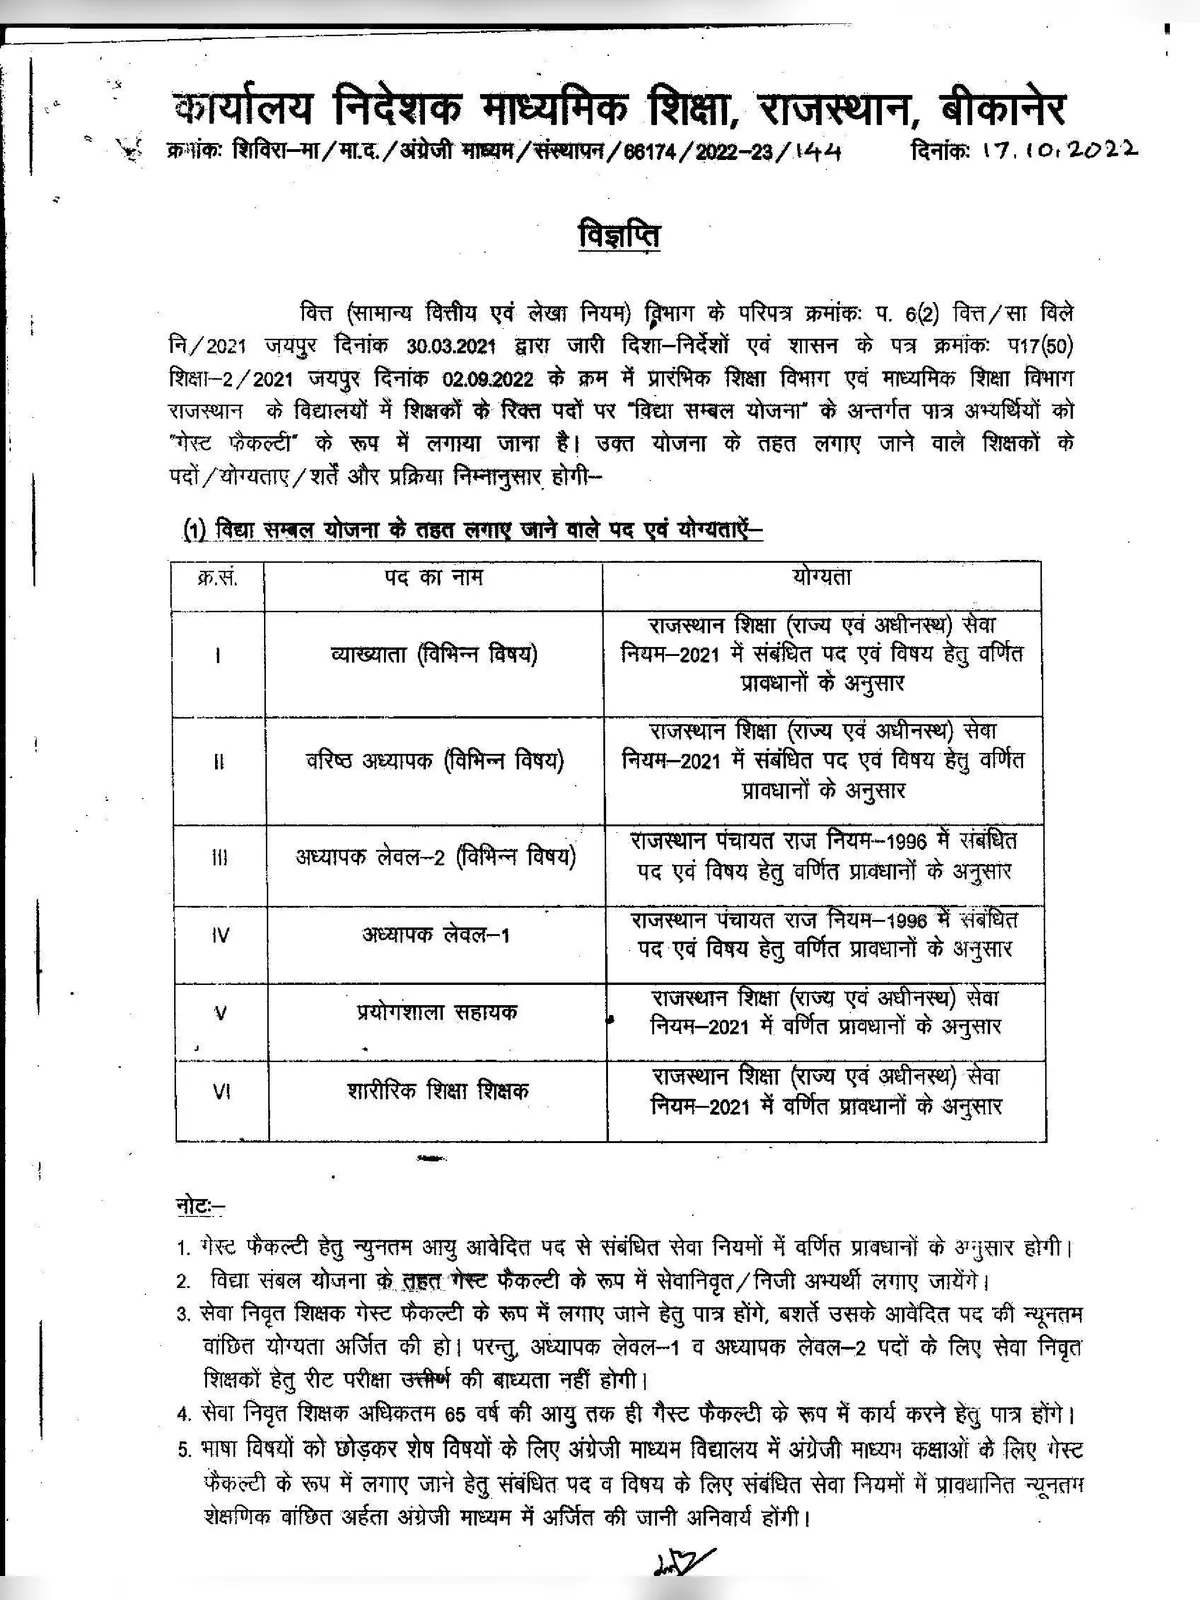 Guest Faculty Recruitment 2022 Rajasthan